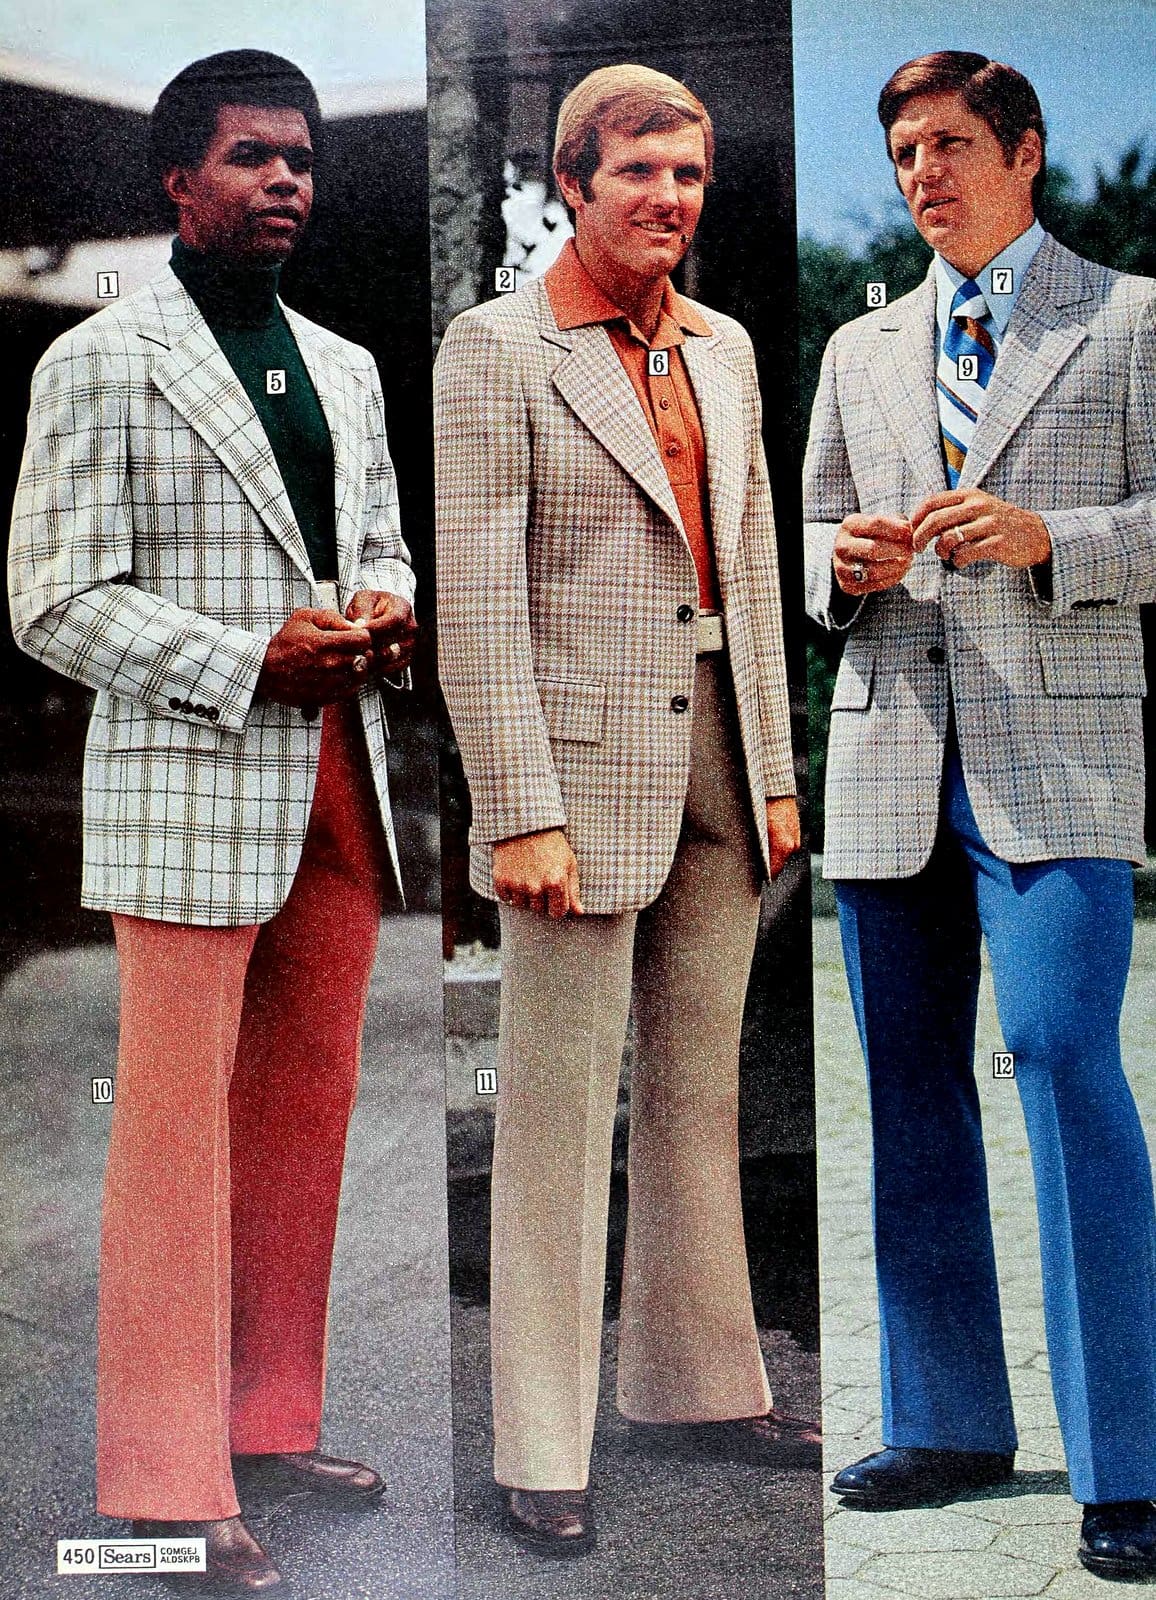 Sears-suits-and-menswear-from-the-1970s-1.jpg